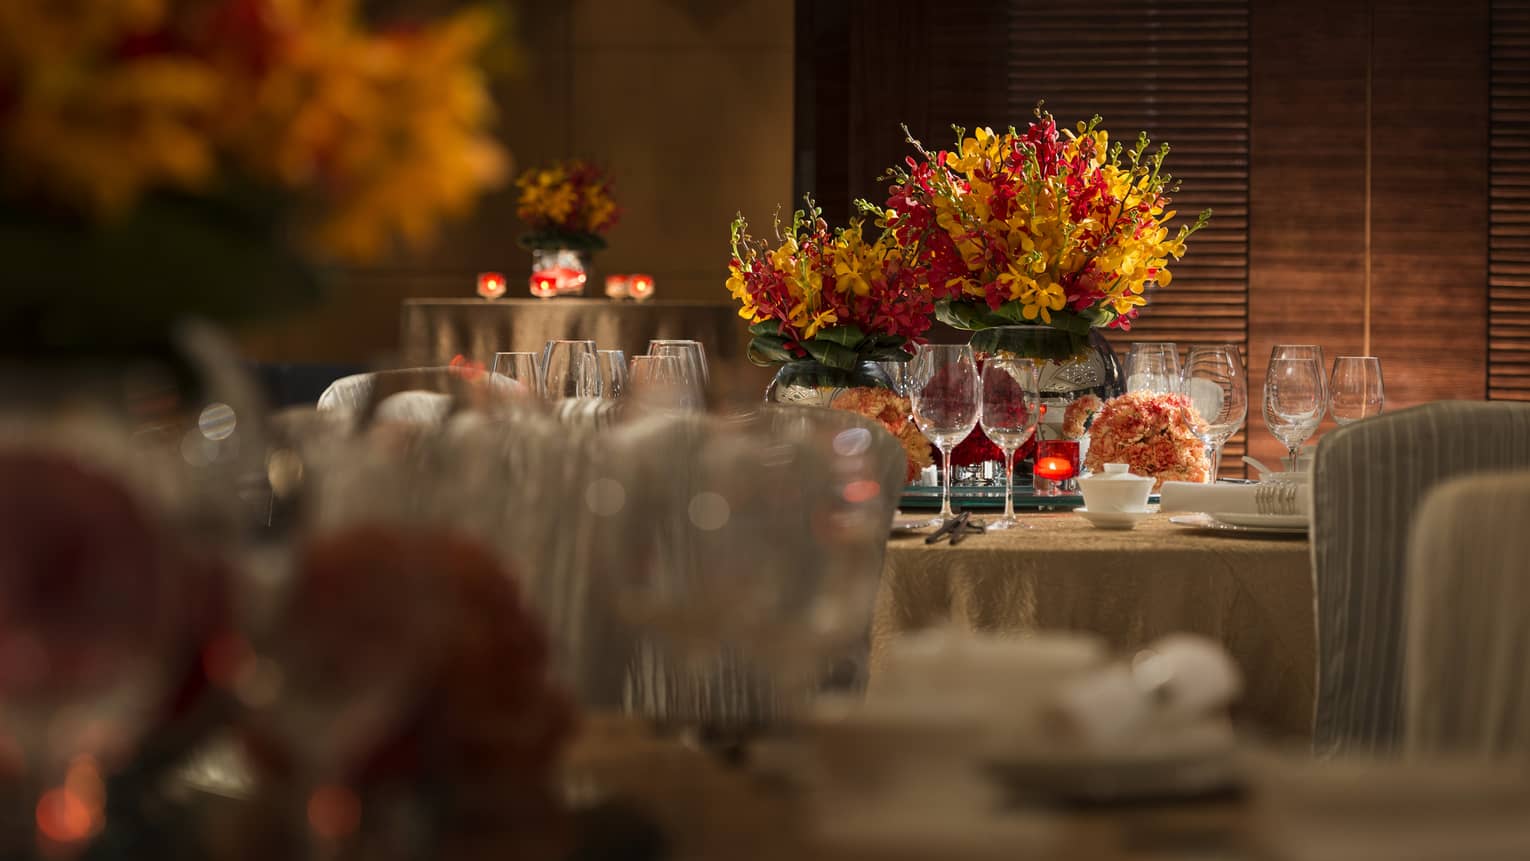 Orange and red flowers, candles on round banquet tables with gold linens